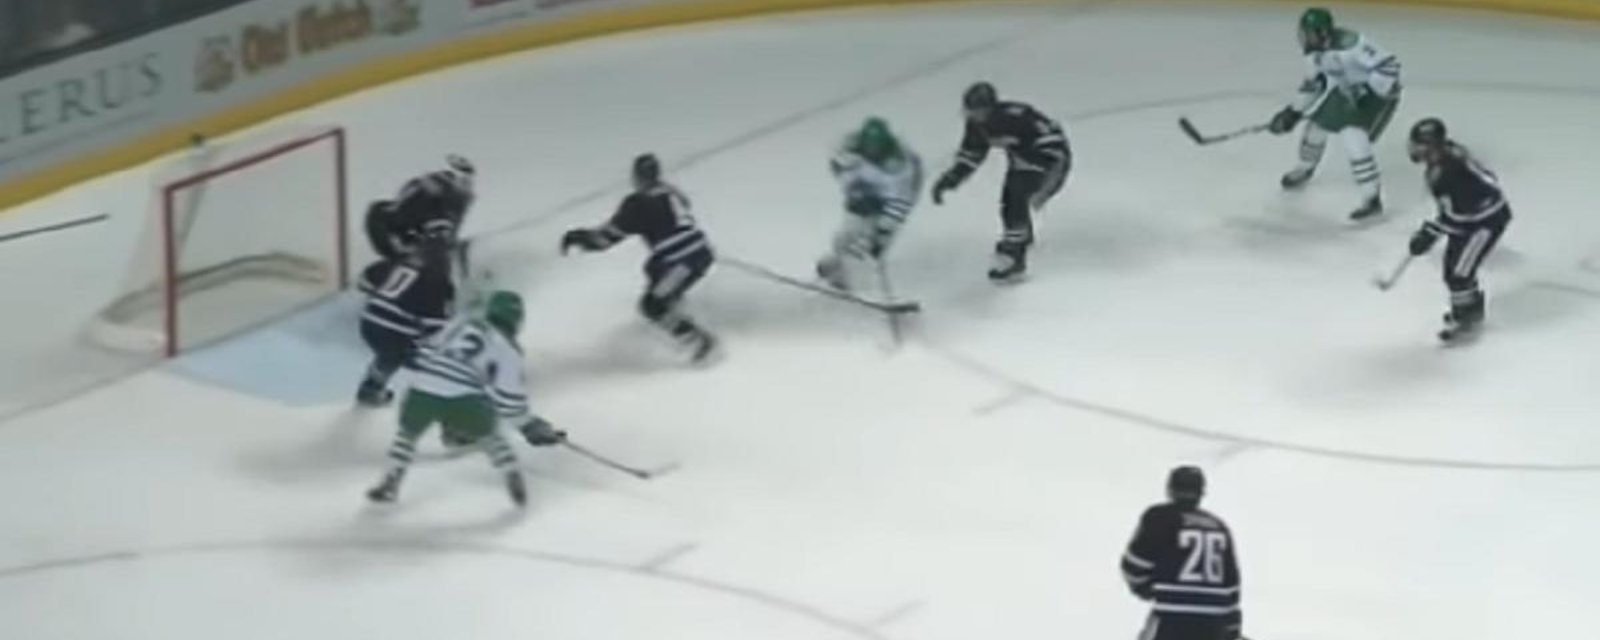 Hockey goal of the year candidate!